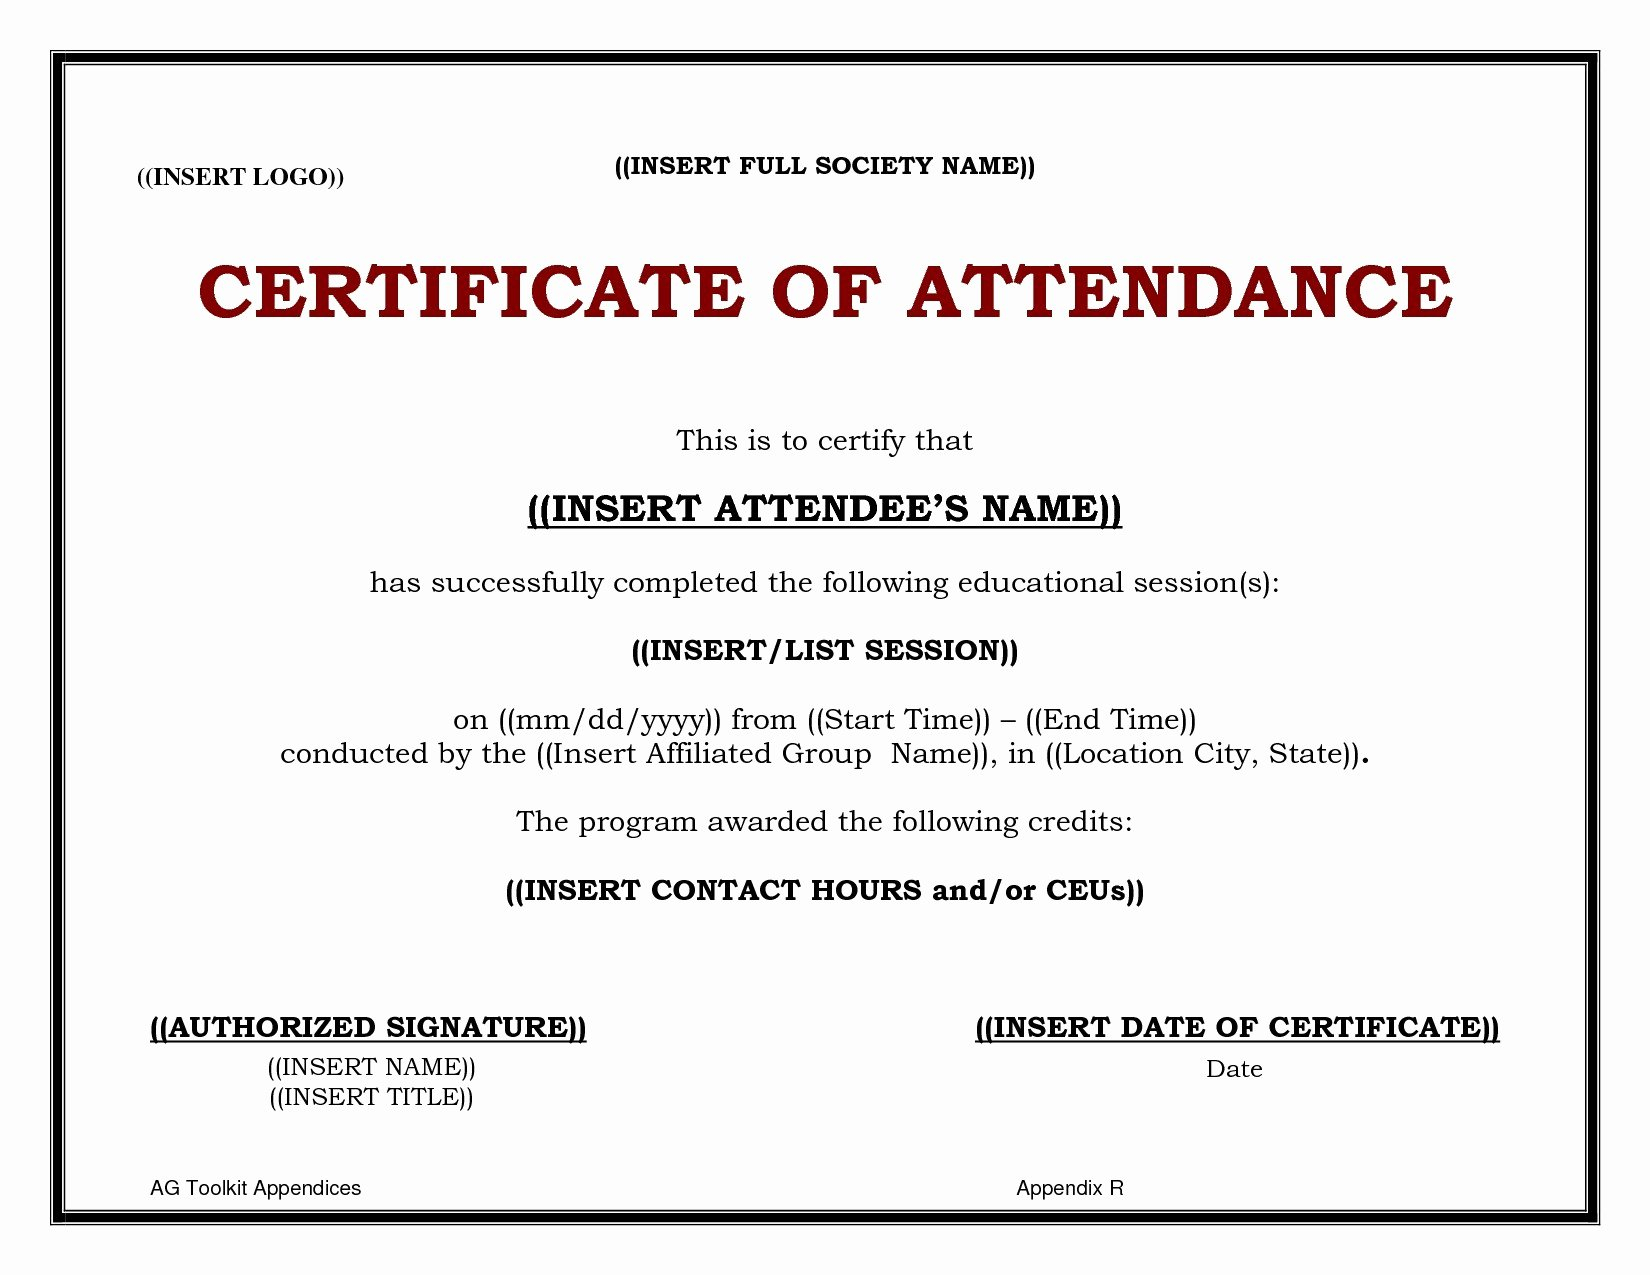 30 Ceu Certificate Of Attendance Template | Pryncepality Within Conference Participation Certificate Template